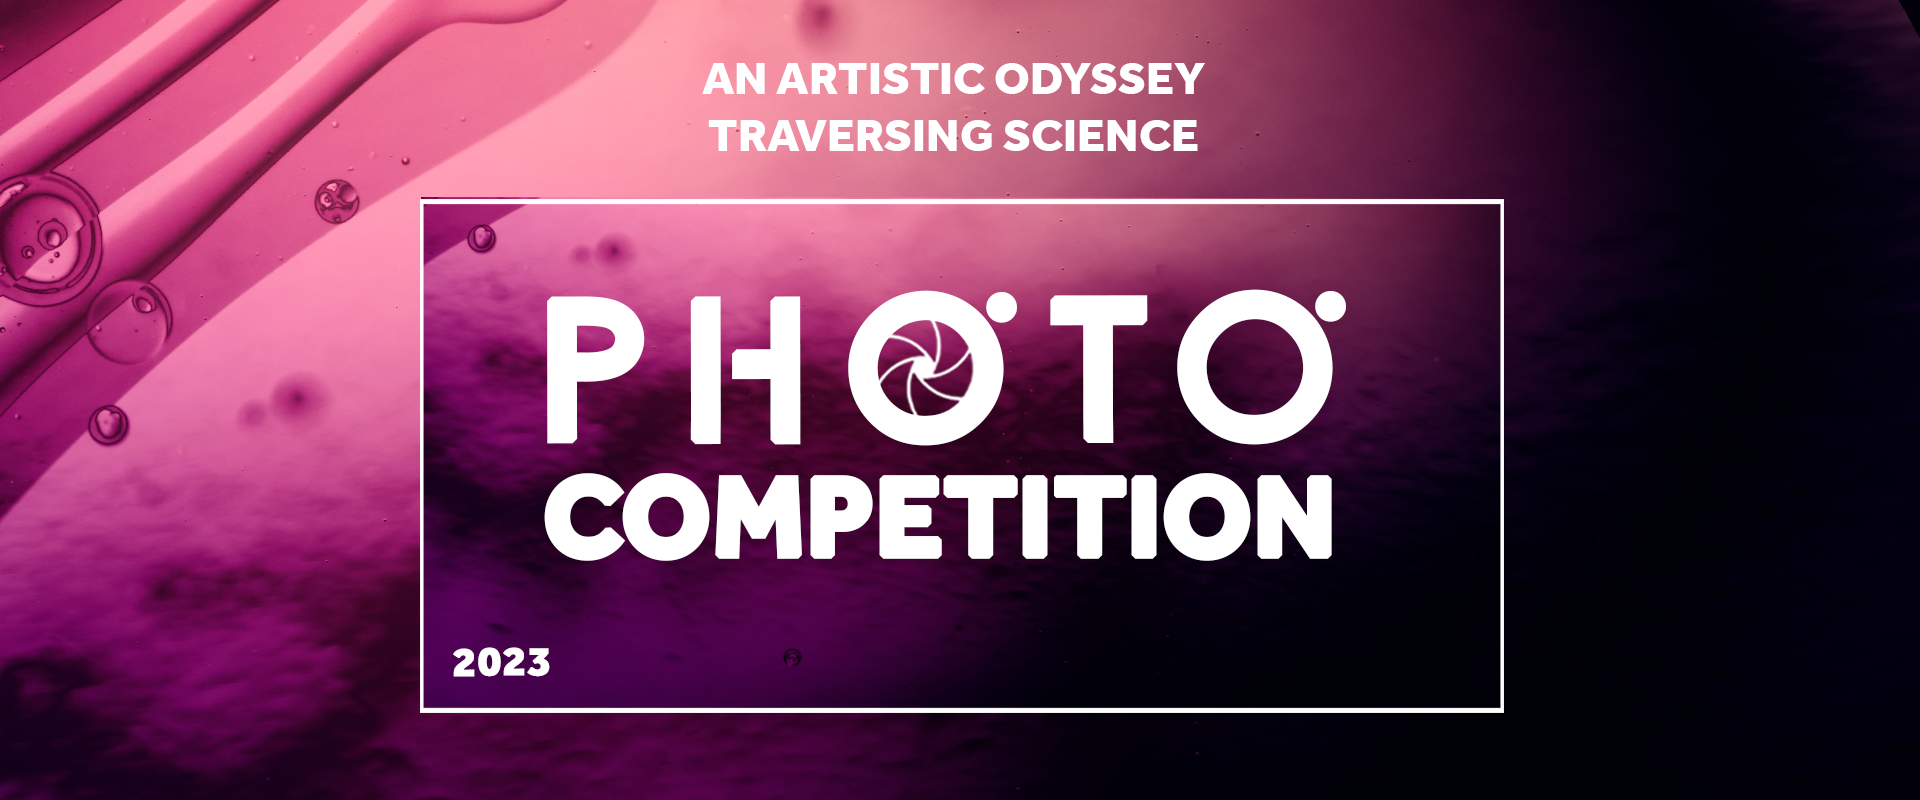 [Photo competition 2023] An artistic odyssey traversing science